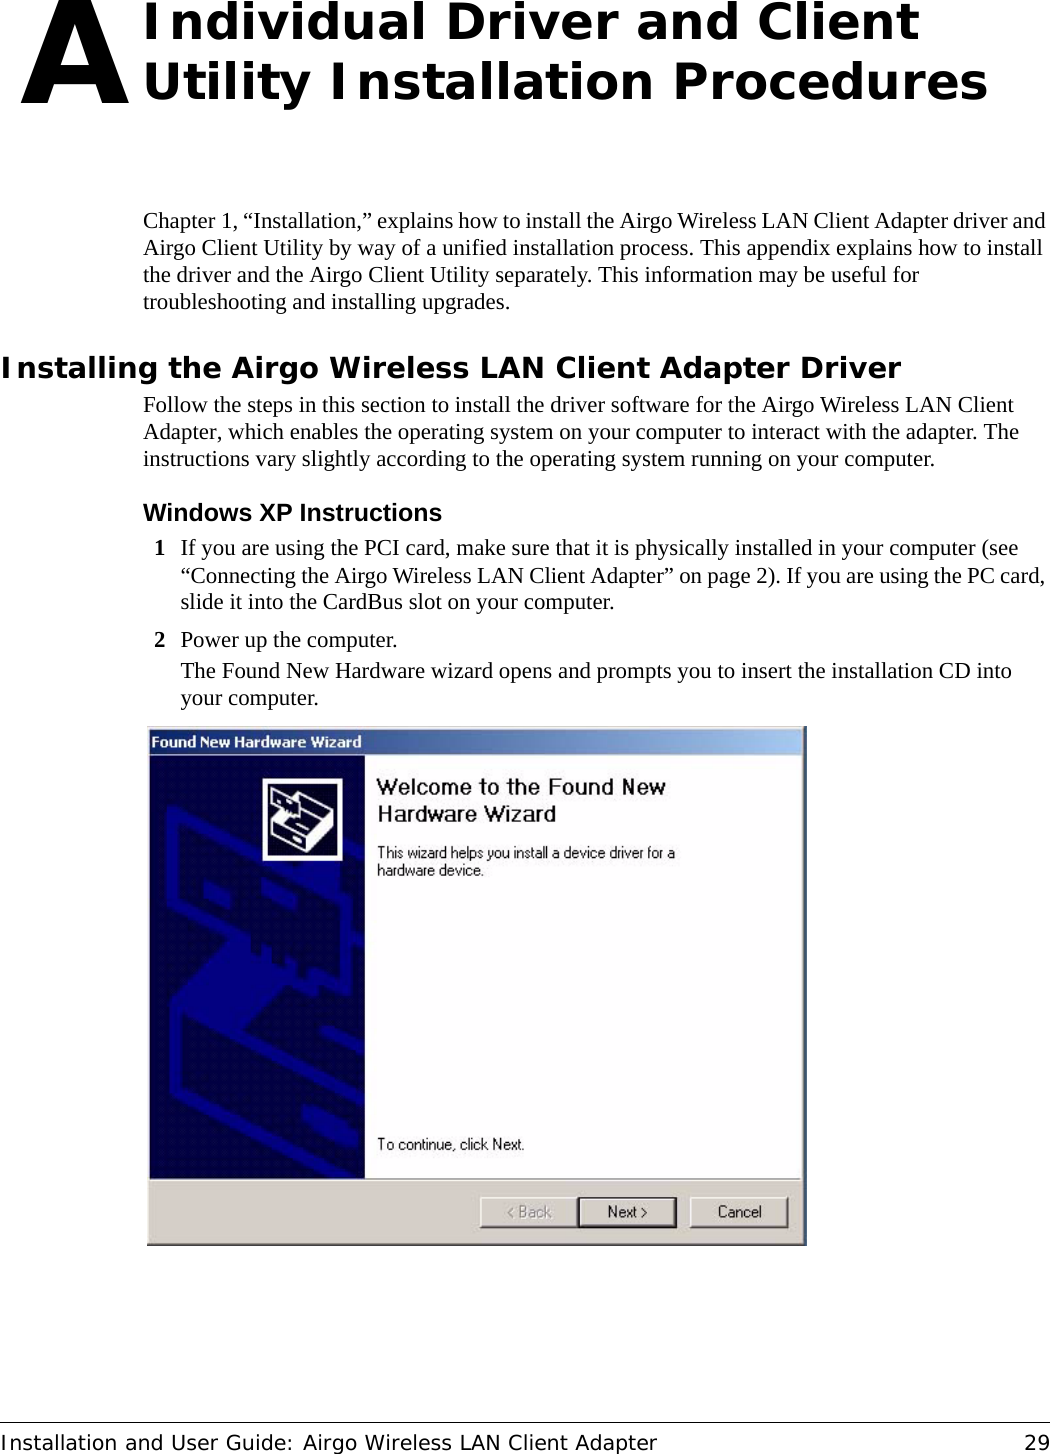 Installation and User Guide: Airgo Wireless LAN Client Adapter 29AIndividual Driver and Client Utility Installation ProceduresChapter 1, “Installation,” explains how to install the Airgo Wireless LAN Client Adapter driver and Airgo Client Utility by way of a unified installation process. This appendix explains how to install the driver and the Airgo Client Utility separately. This information may be useful for troubleshooting and installing upgrades.Installing the Airgo Wireless LAN Client Adapter DriverFollow the steps in this section to install the driver software for the Airgo Wireless LAN Client Adapter, which enables the operating system on your computer to interact with the adapter. The instructions vary slightly according to the operating system running on your computer.Windows XP Instructions1If you are using the PCI card, make sure that it is physically installed in your computer (see “Connecting the Airgo Wireless LAN Client Adapter” on page 2). If you are using the PC card, slide it into the CardBus slot on your computer.2Power up the computer.The Found New Hardware wizard opens and prompts you to insert the installation CD into your computer.